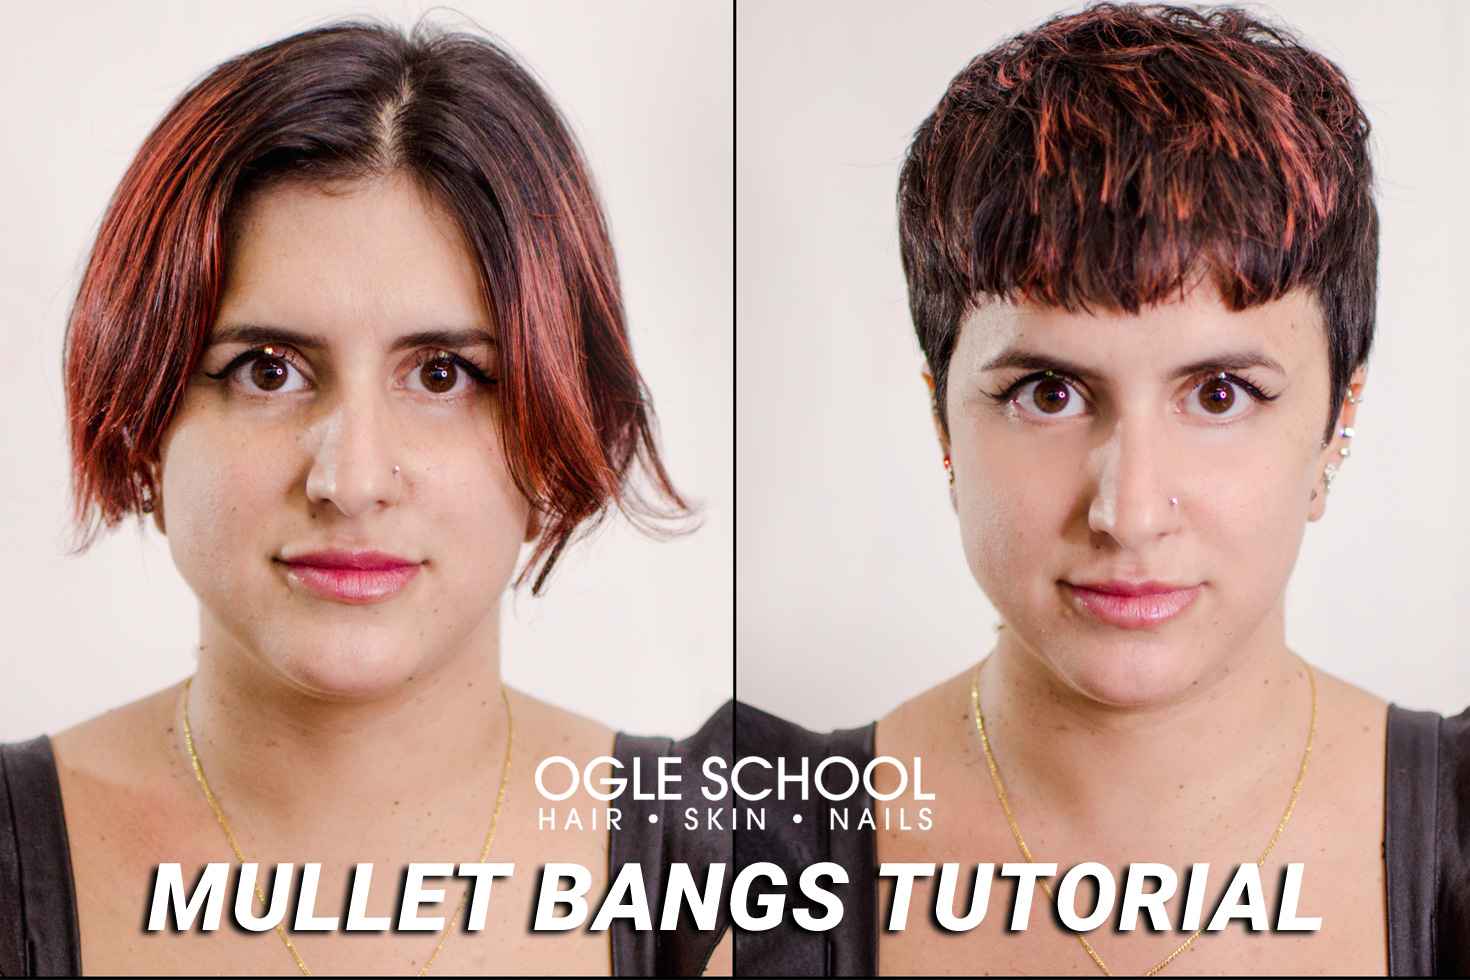 How To Cut and Style a Face-Framing Pixie Cut With Mullet Bangs